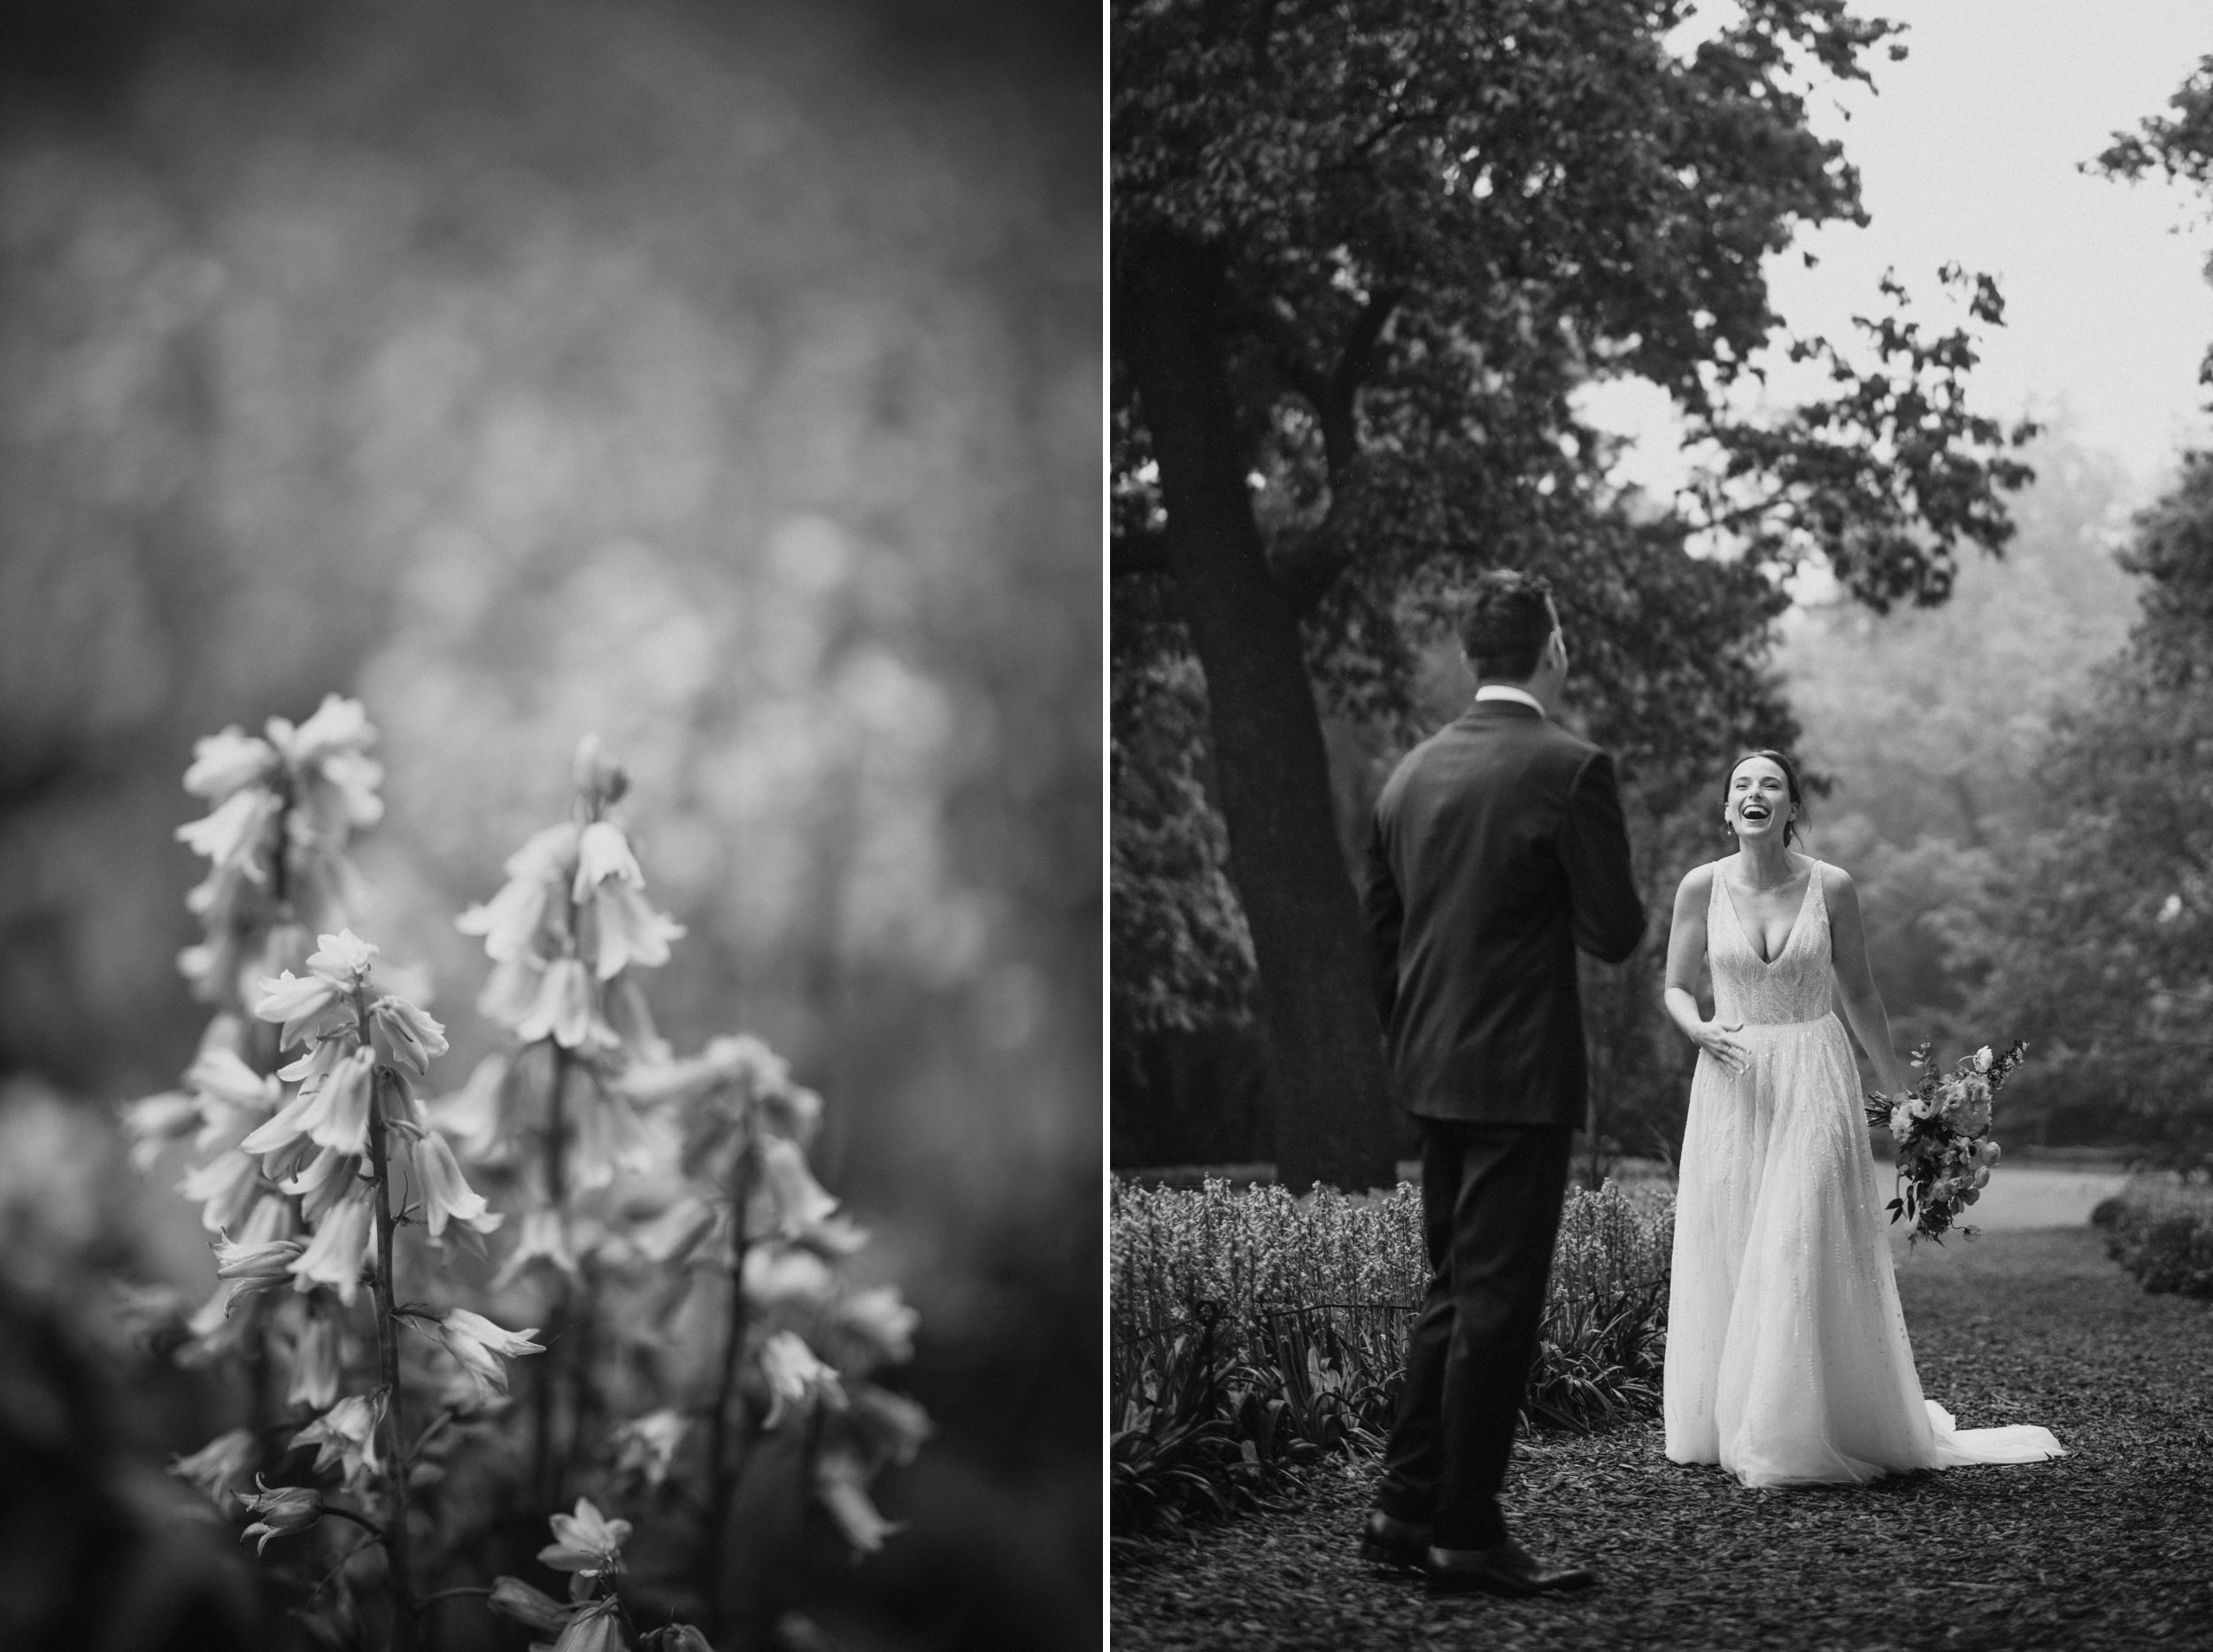 First look of a bride and groom in black-and-white on a rainy summer day at the Brooklyn botanic Garden